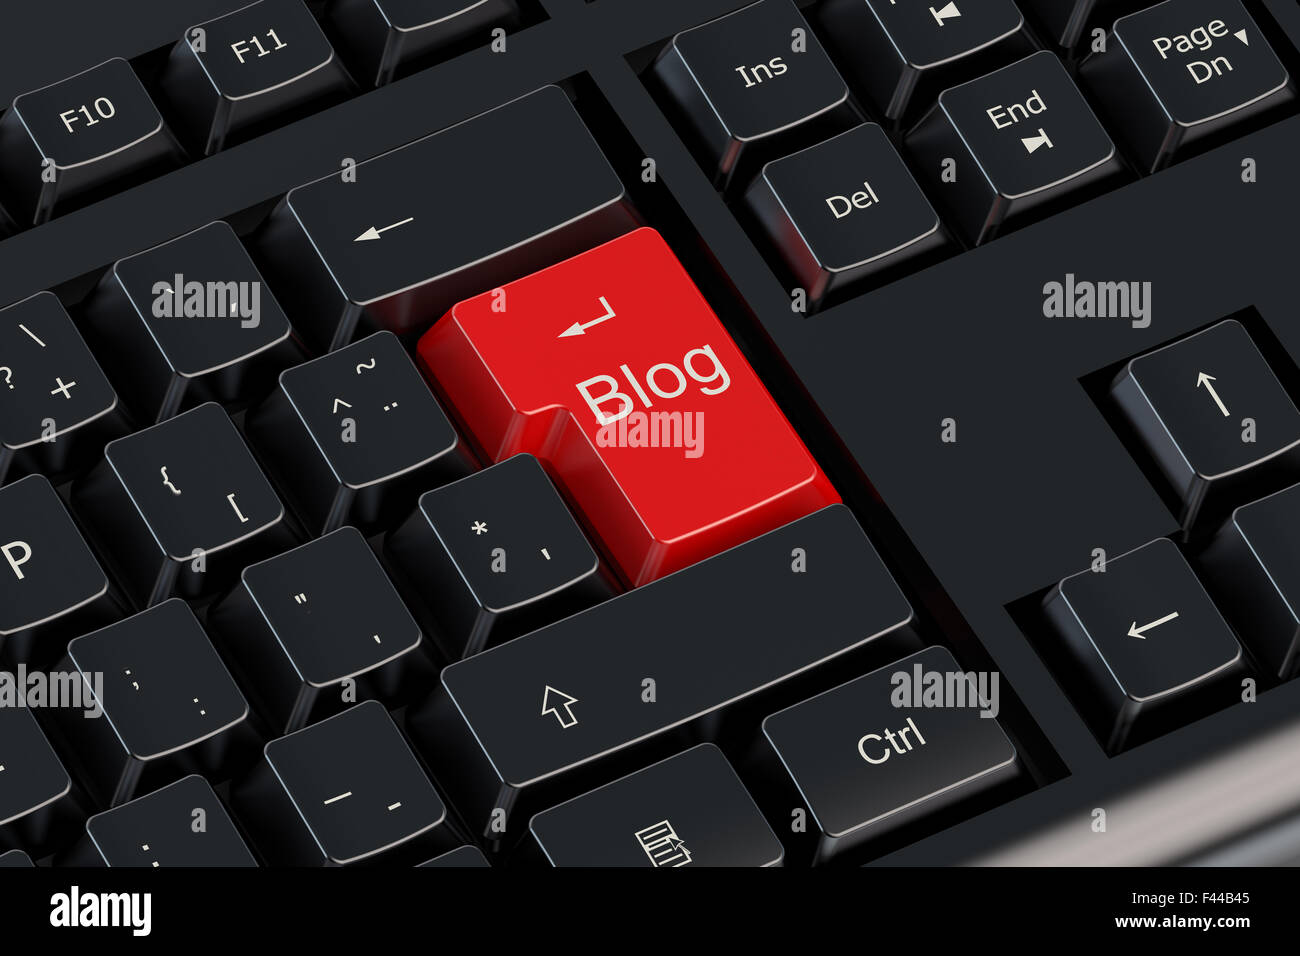 Blog red keyboard button Stock Photo